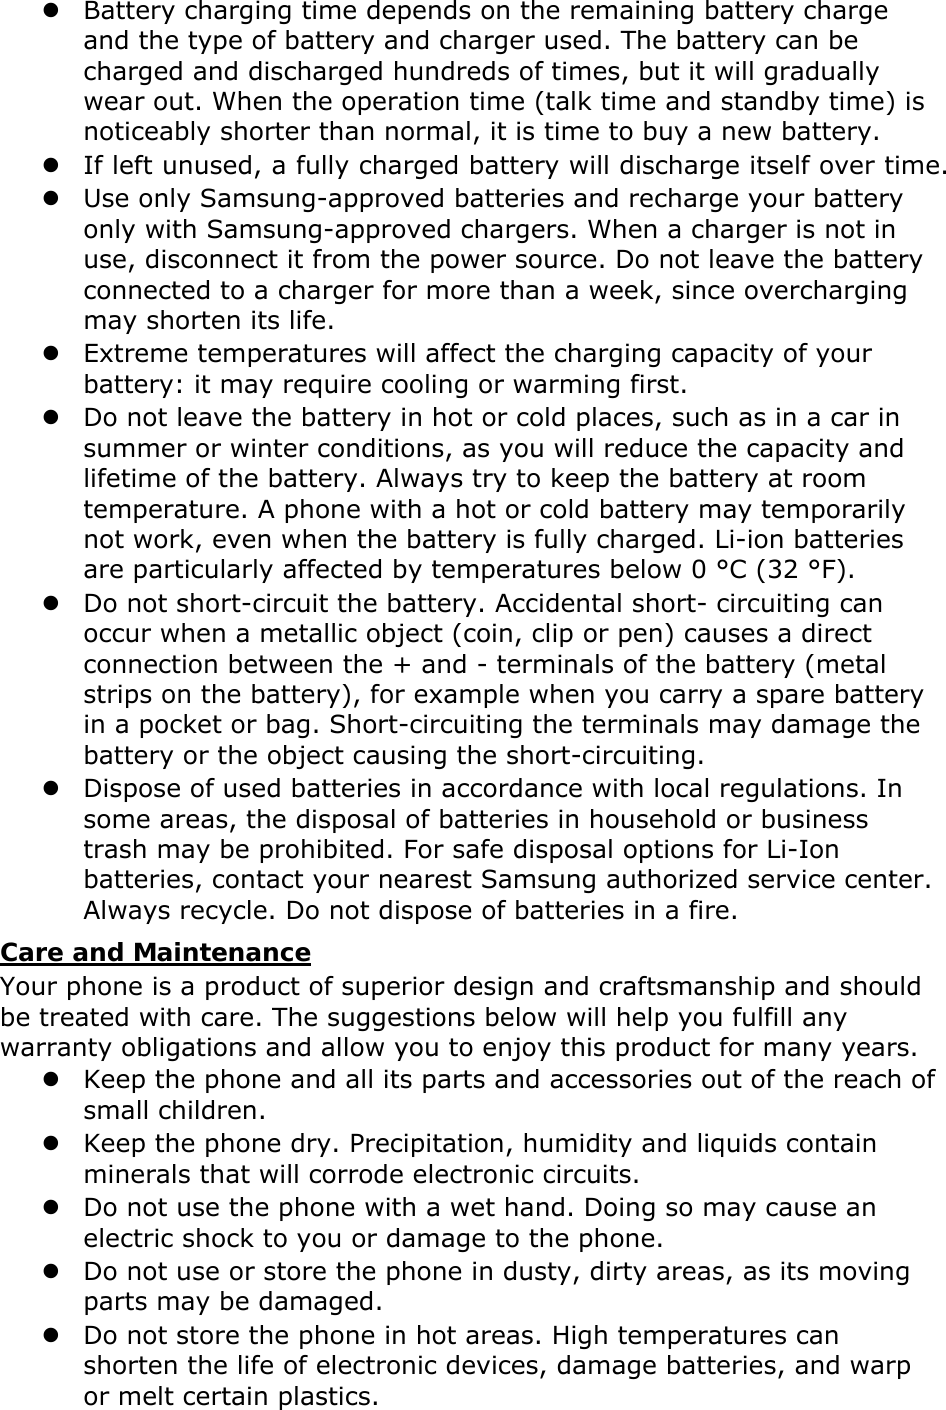  Battery charging time depends on the remaining battery charge and the type of battery and charger used. The battery can be charged and discharged hundreds of times, but it will gradually wear out. When the operation time (talk time and standby time) is noticeably shorter than normal, it is time to buy a new battery.  If left unused, a fully charged battery will discharge itself over time.  Use only Samsung-approved batteries and recharge your battery only with Samsung-approved chargers. When a charger is not in use, disconnect it from the power source. Do not leave the battery connected to a charger for more than a week, since overcharging may shorten its life.  Extreme temperatures will affect the charging capacity of your battery: it may require cooling or warming first.  Do not leave the battery in hot or cold places, such as in a car in summer or winter conditions, as you will reduce the capacity and lifetime of the battery. Always try to keep the battery at room temperature. A phone with a hot or cold battery may temporarily not work, even when the battery is fully charged. Li-ion batteries are particularly affected by temperatures below 0 °C (32 °F).  Do not short-circuit the battery. Accidental short- circuiting can occur when a metallic object (coin, clip or pen) causes a direct connection between the + and - terminals of the battery (metal strips on the battery), for example when you carry a spare battery in a pocket or bag. Short-circuiting the terminals may damage the battery or the object causing the short-circuiting.  Dispose of used batteries in accordance with local regulations. In some areas, the disposal of batteries in household or business trash may be prohibited. For safe disposal options for Li-Ion batteries, contact your nearest Samsung authorized service center. Always recycle. Do not dispose of batteries in a fire. Care and Maintenance Your phone is a product of superior design and craftsmanship and should be treated with care. The suggestions below will help you fulfill any warranty obligations and allow you to enjoy this product for many years.  Keep the phone and all its parts and accessories out of the reach of small children.  Keep the phone dry. Precipitation, humidity and liquids contain minerals that will corrode electronic circuits.  Do not use the phone with a wet hand. Doing so may cause an electric shock to you or damage to the phone.  Do not use or store the phone in dusty, dirty areas, as its moving parts may be damaged.  Do not store the phone in hot areas. High temperatures can shorten the life of electronic devices, damage batteries, and warp or melt certain plastics. 